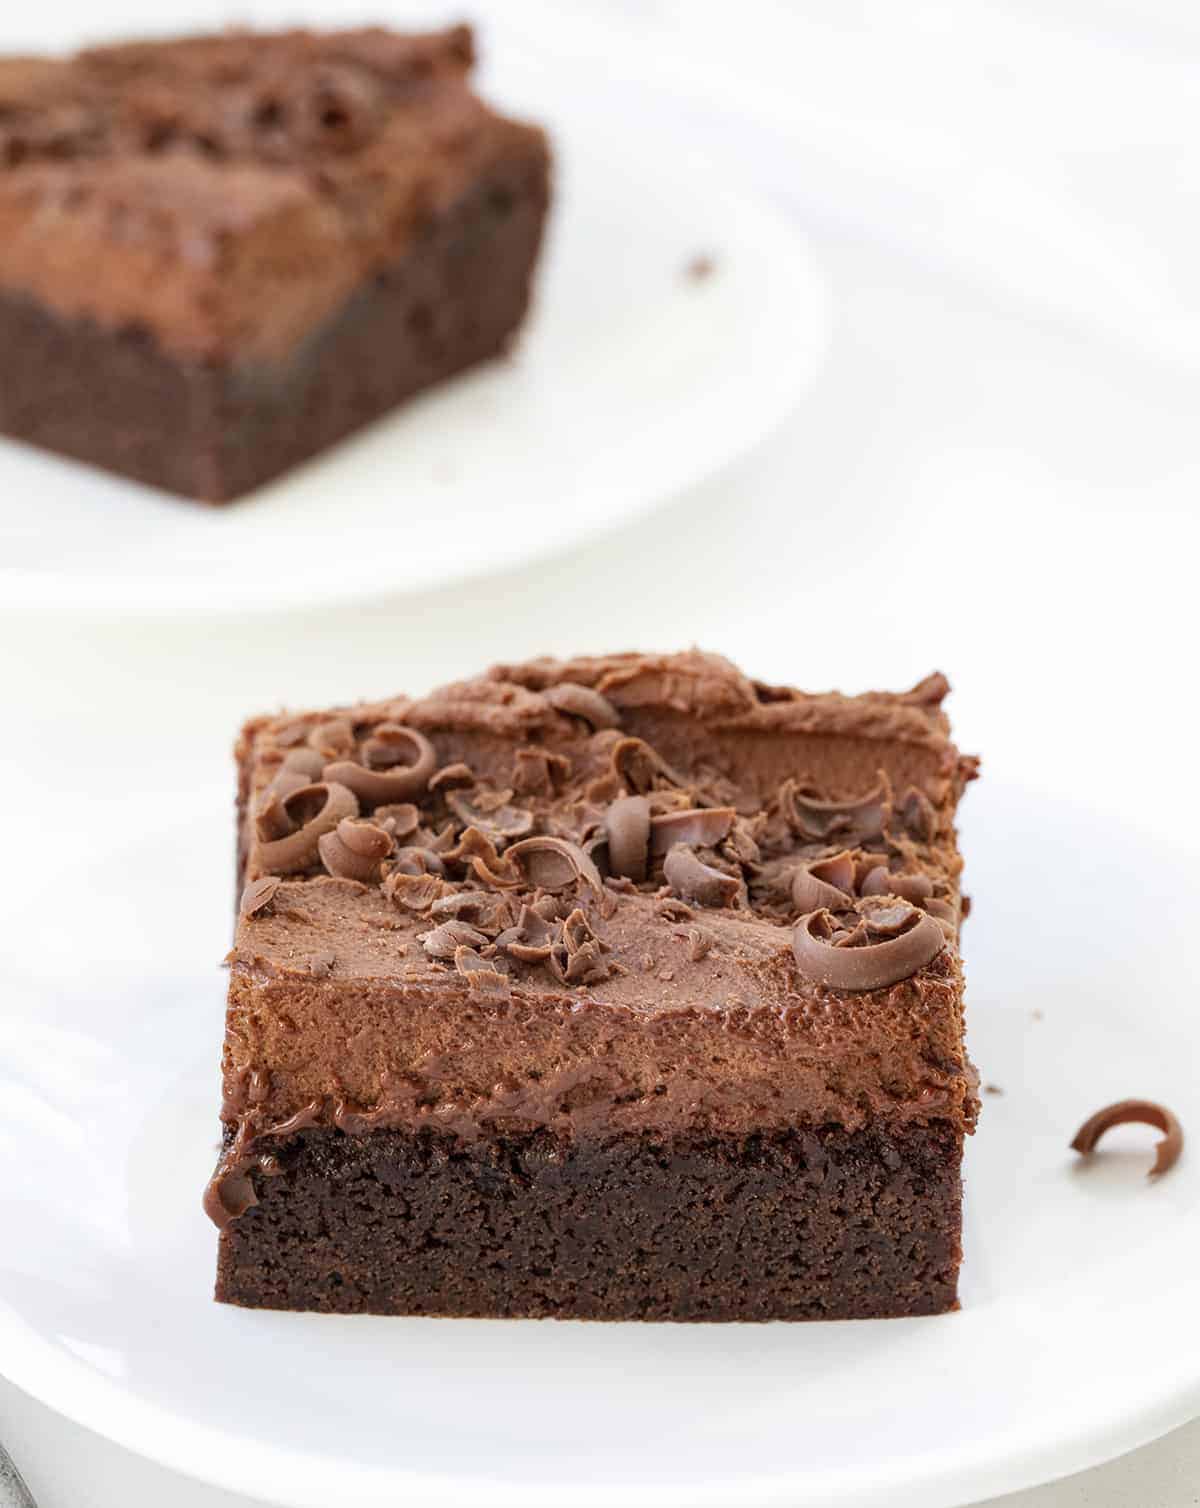 Two Slices of Chocolate Mousse Brownies